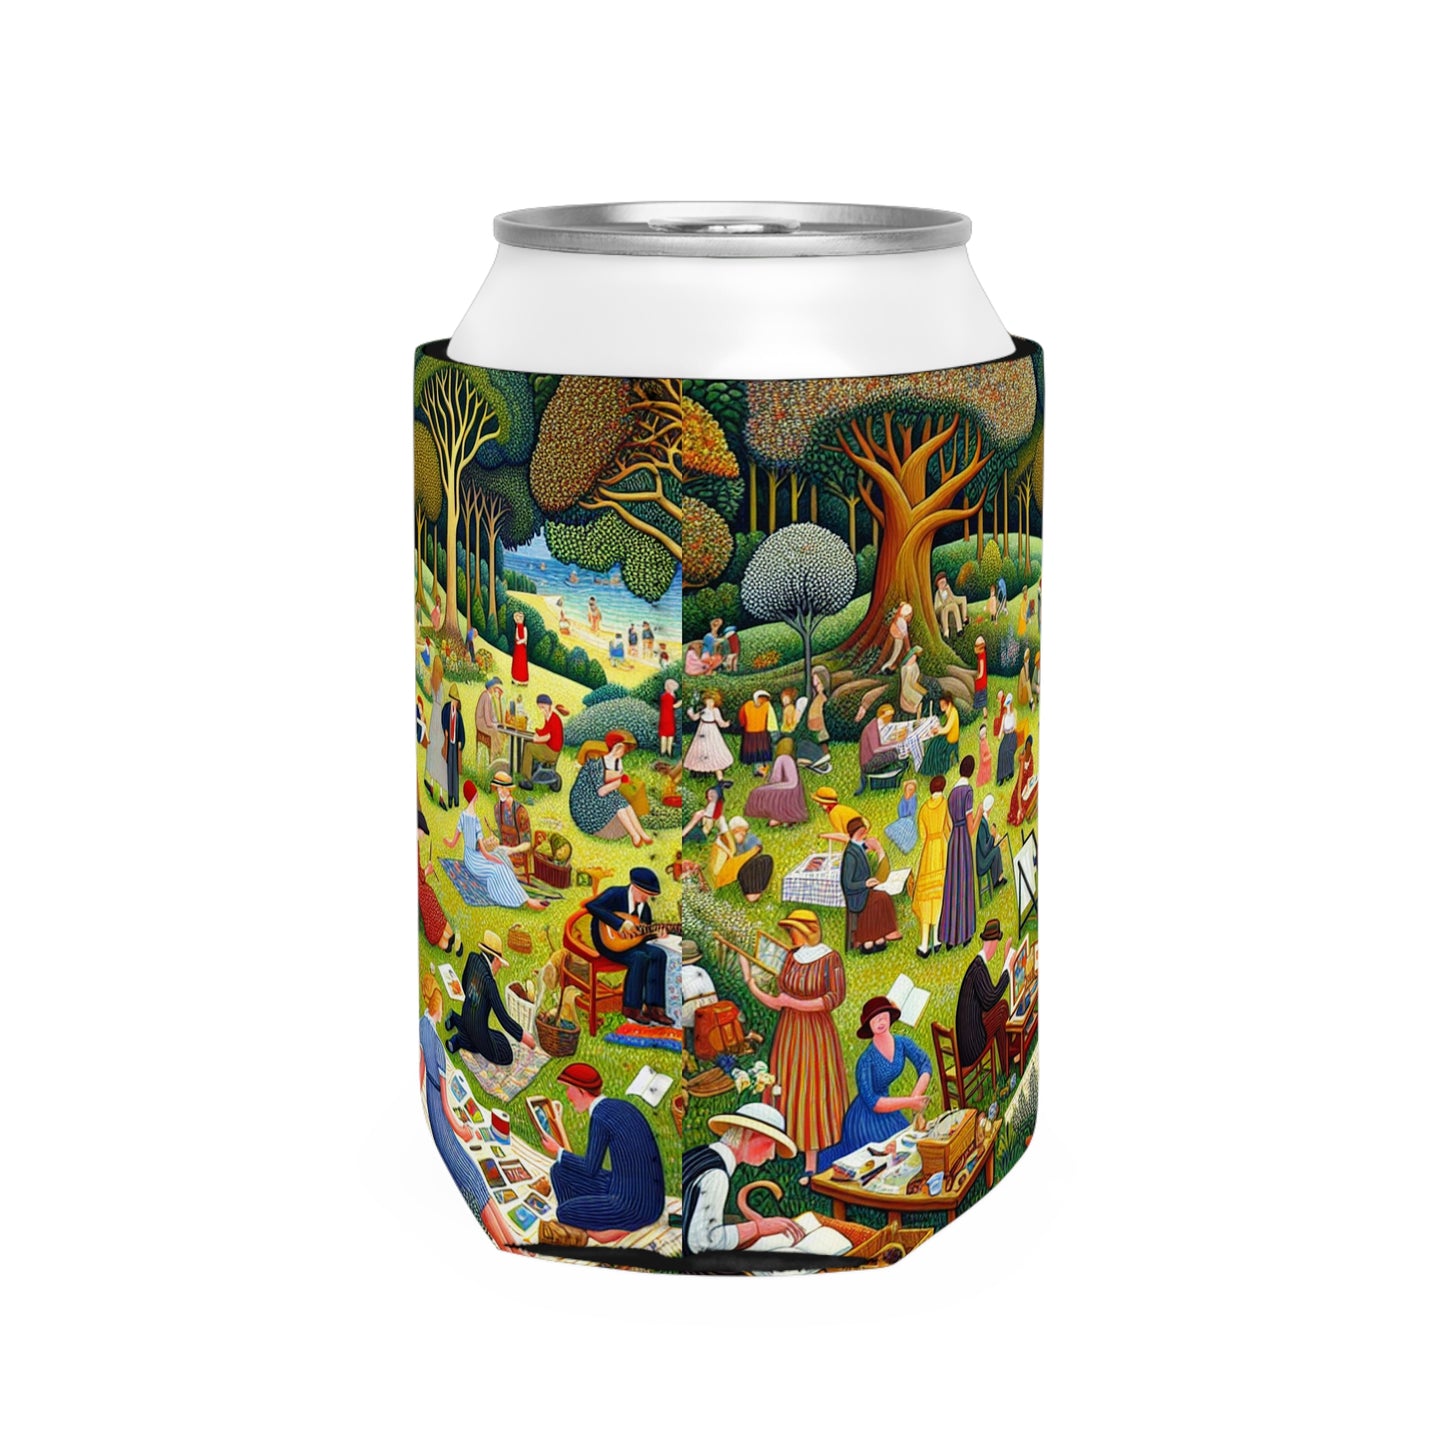 "Whimsical Village Delights" - The Alien Can Cooler Funda Arte ingenuo